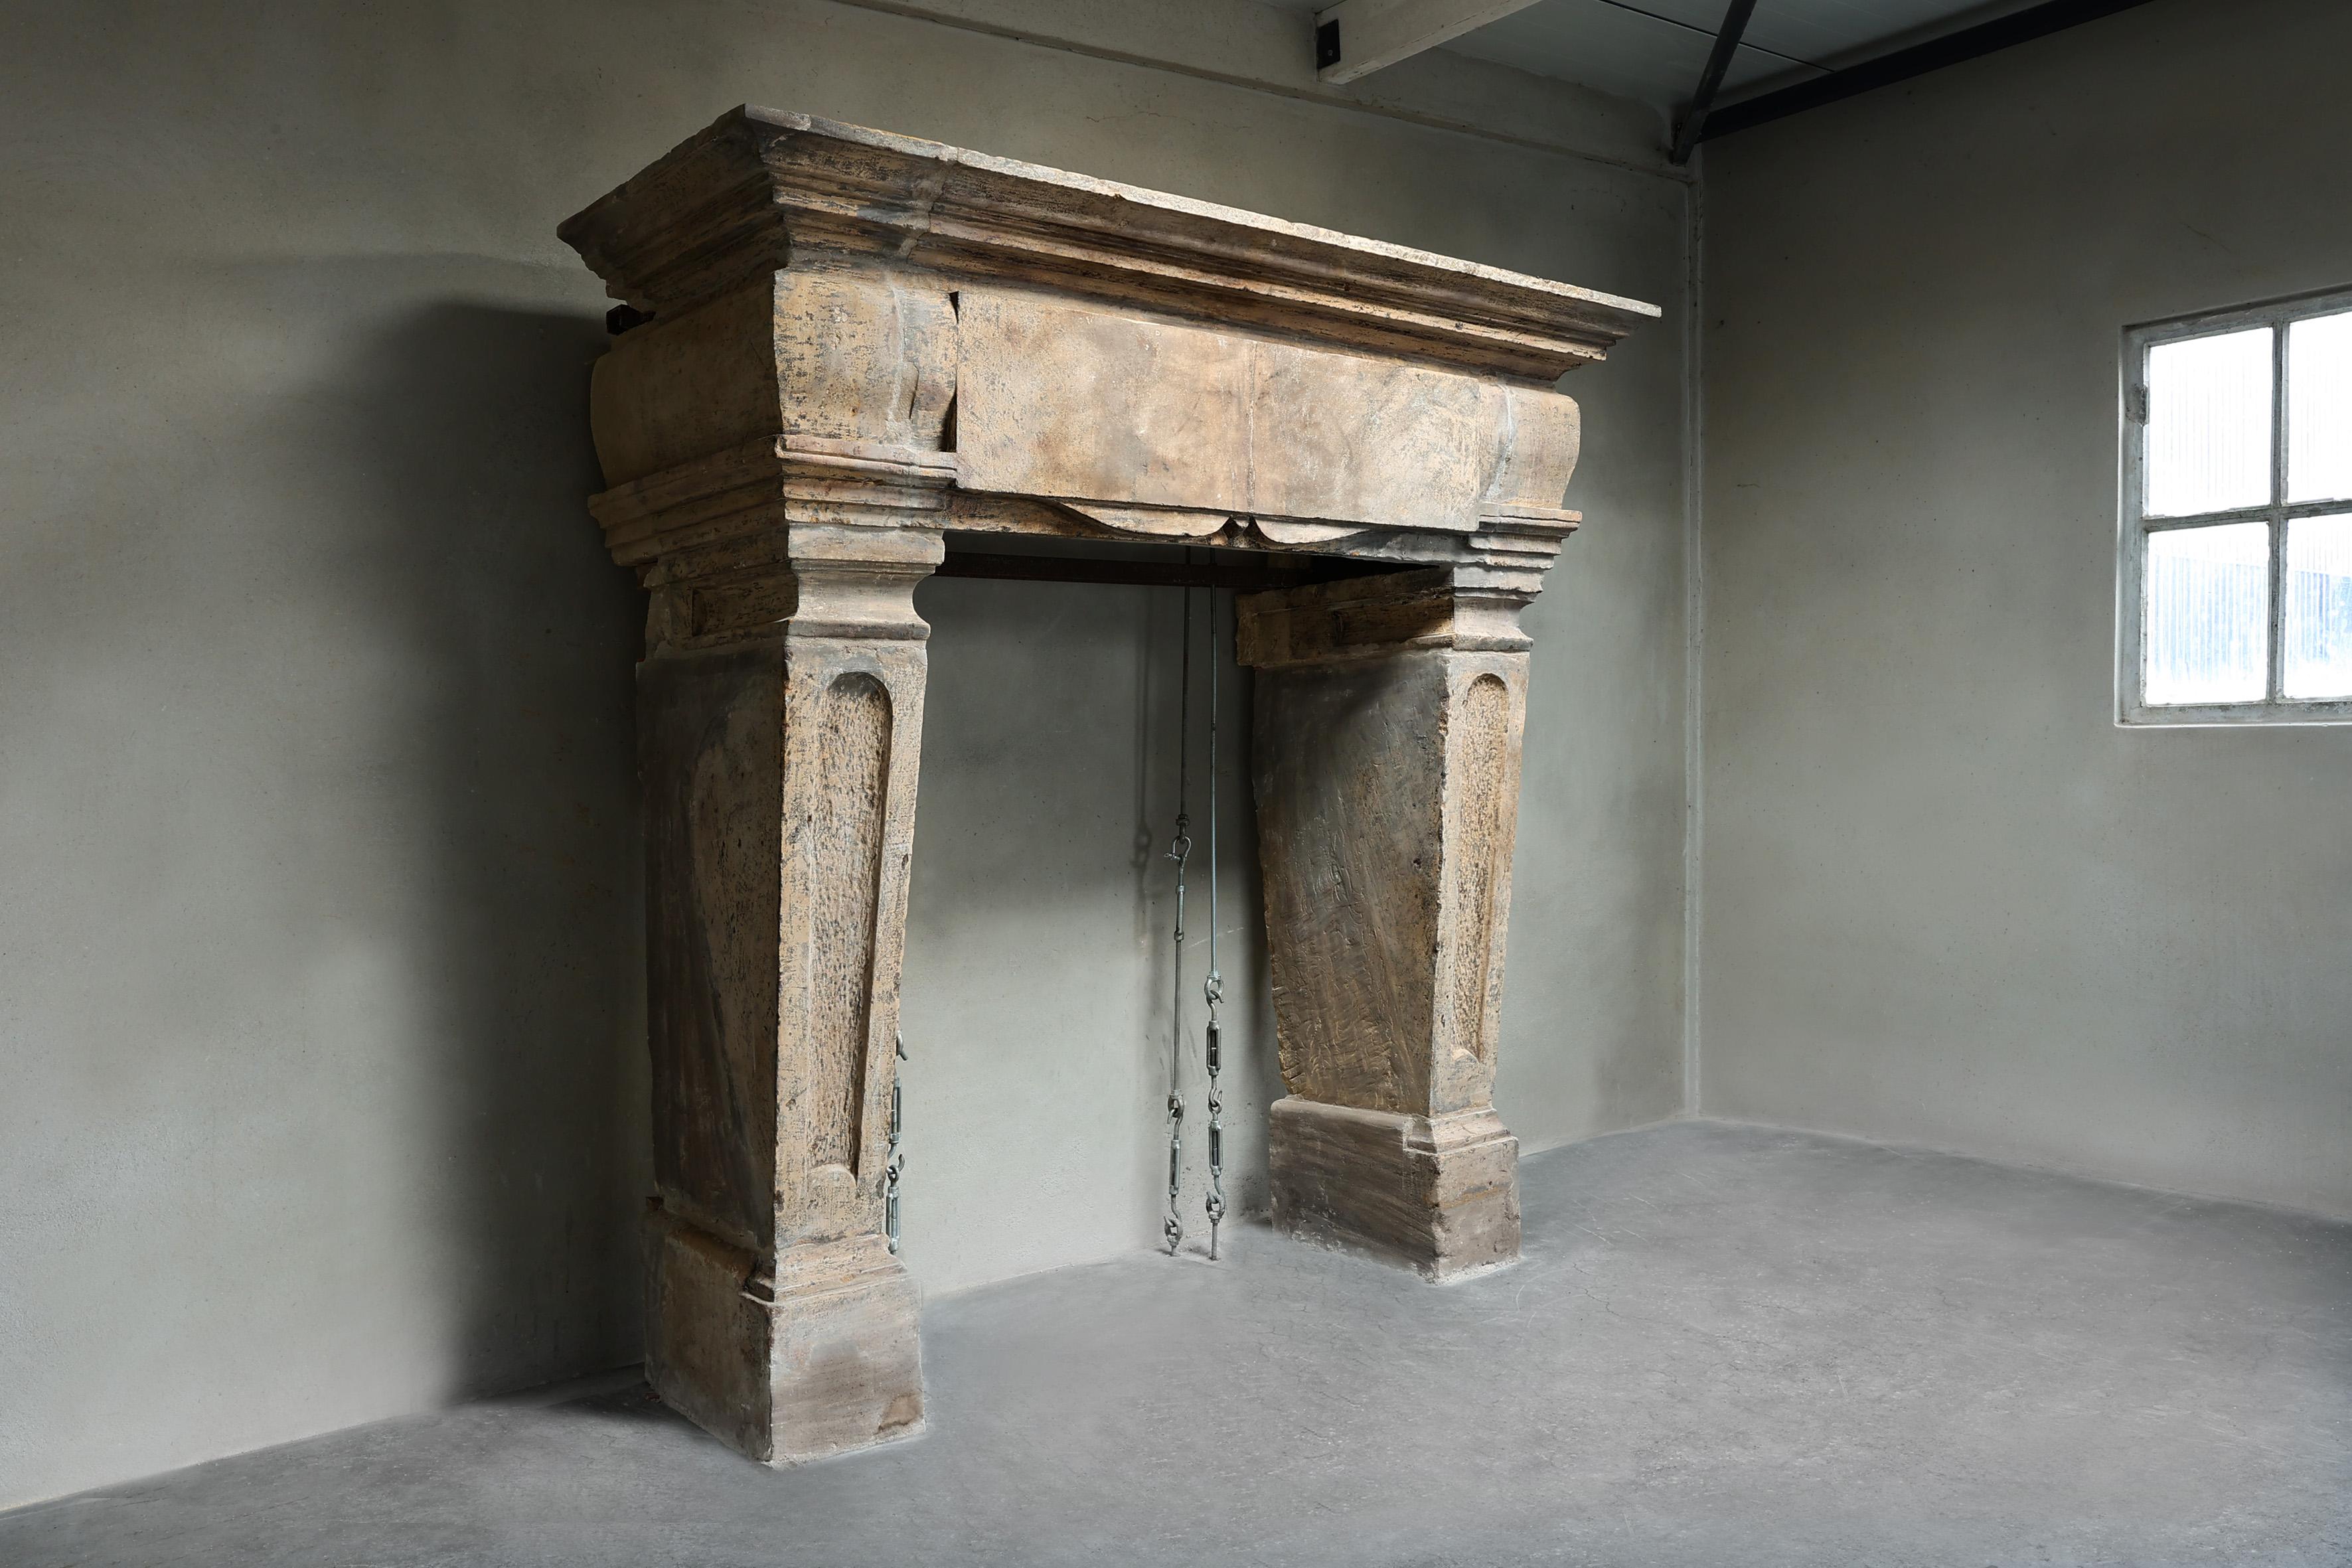 Very imposing castle fireplace of French limestone from the 19th century. This antique mantle has a width of 210 cm and is in the style of Louis XIII. A fireplace with beautiful decorations and lines in the top and on the legs.
Be aware that the